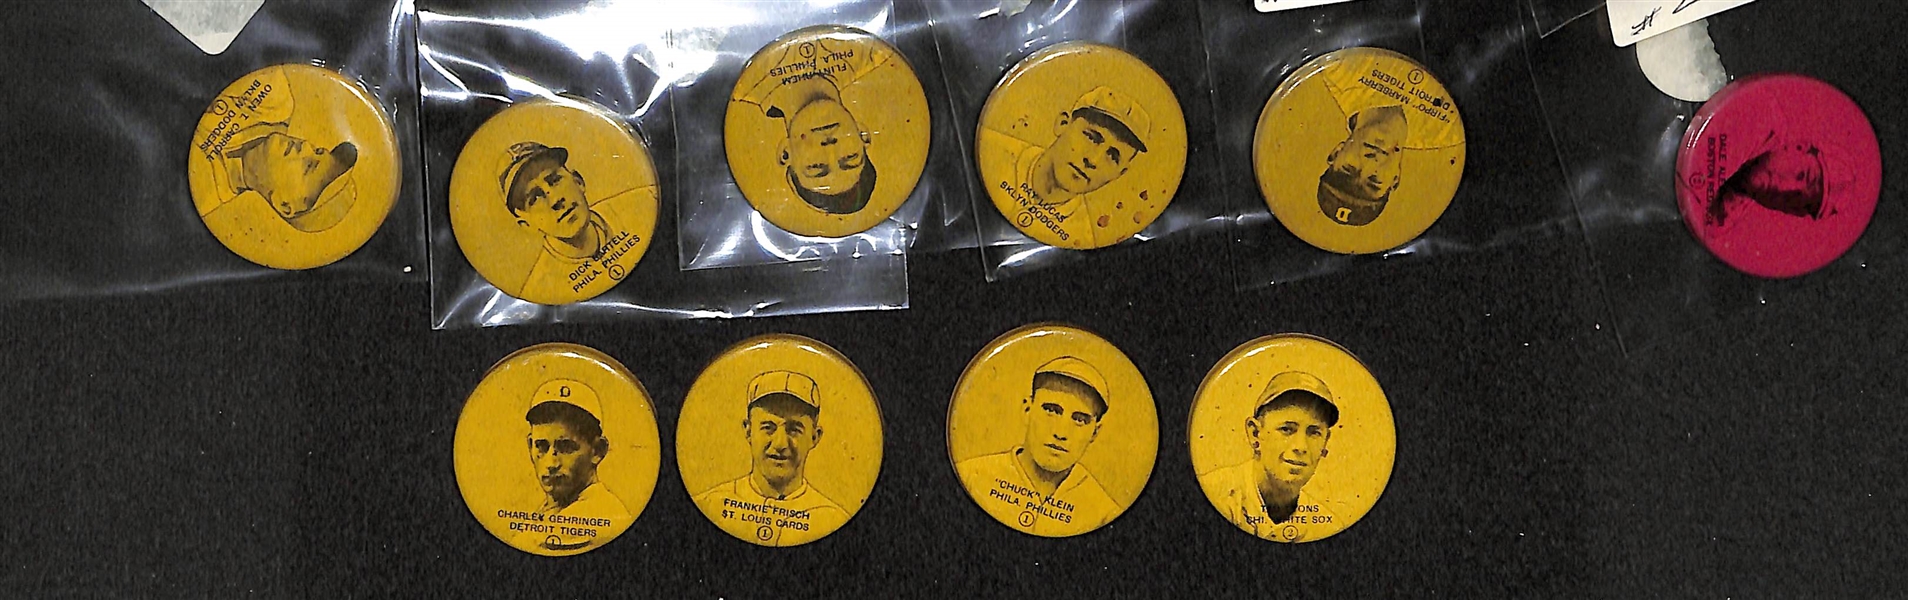 Lot of 10 - 1933 PX3 Double Header Buttons w. Charlie Gehringer